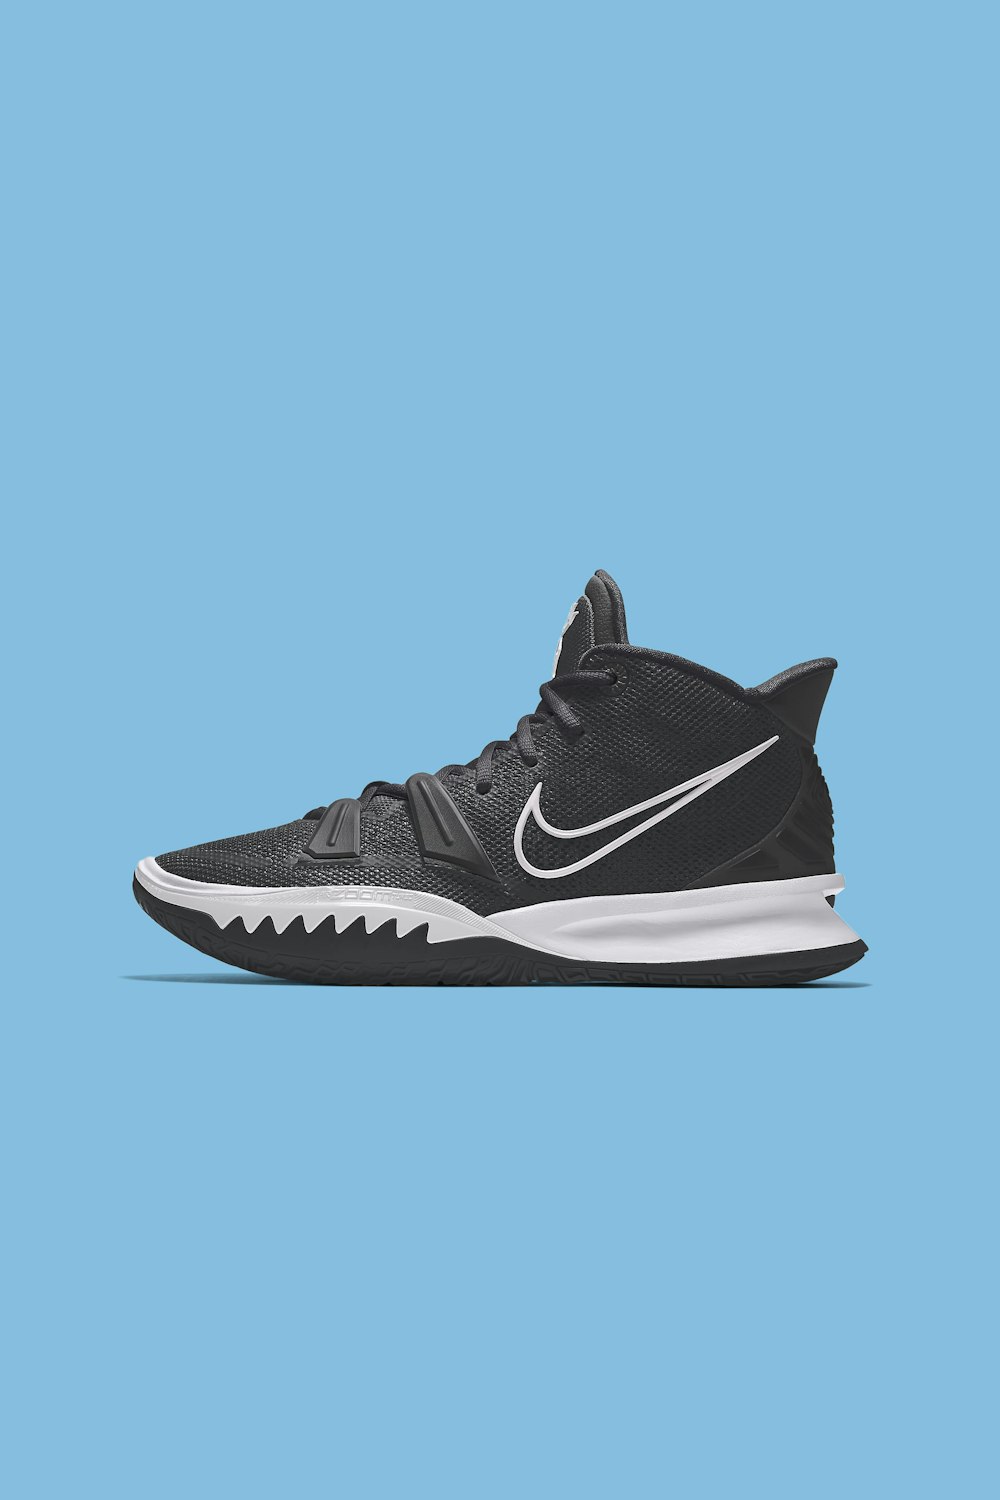 niettemin Toestemming spiritueel 20+ Nike Shoes Pictures | Download Free Images & Stock Photos on Unsplash